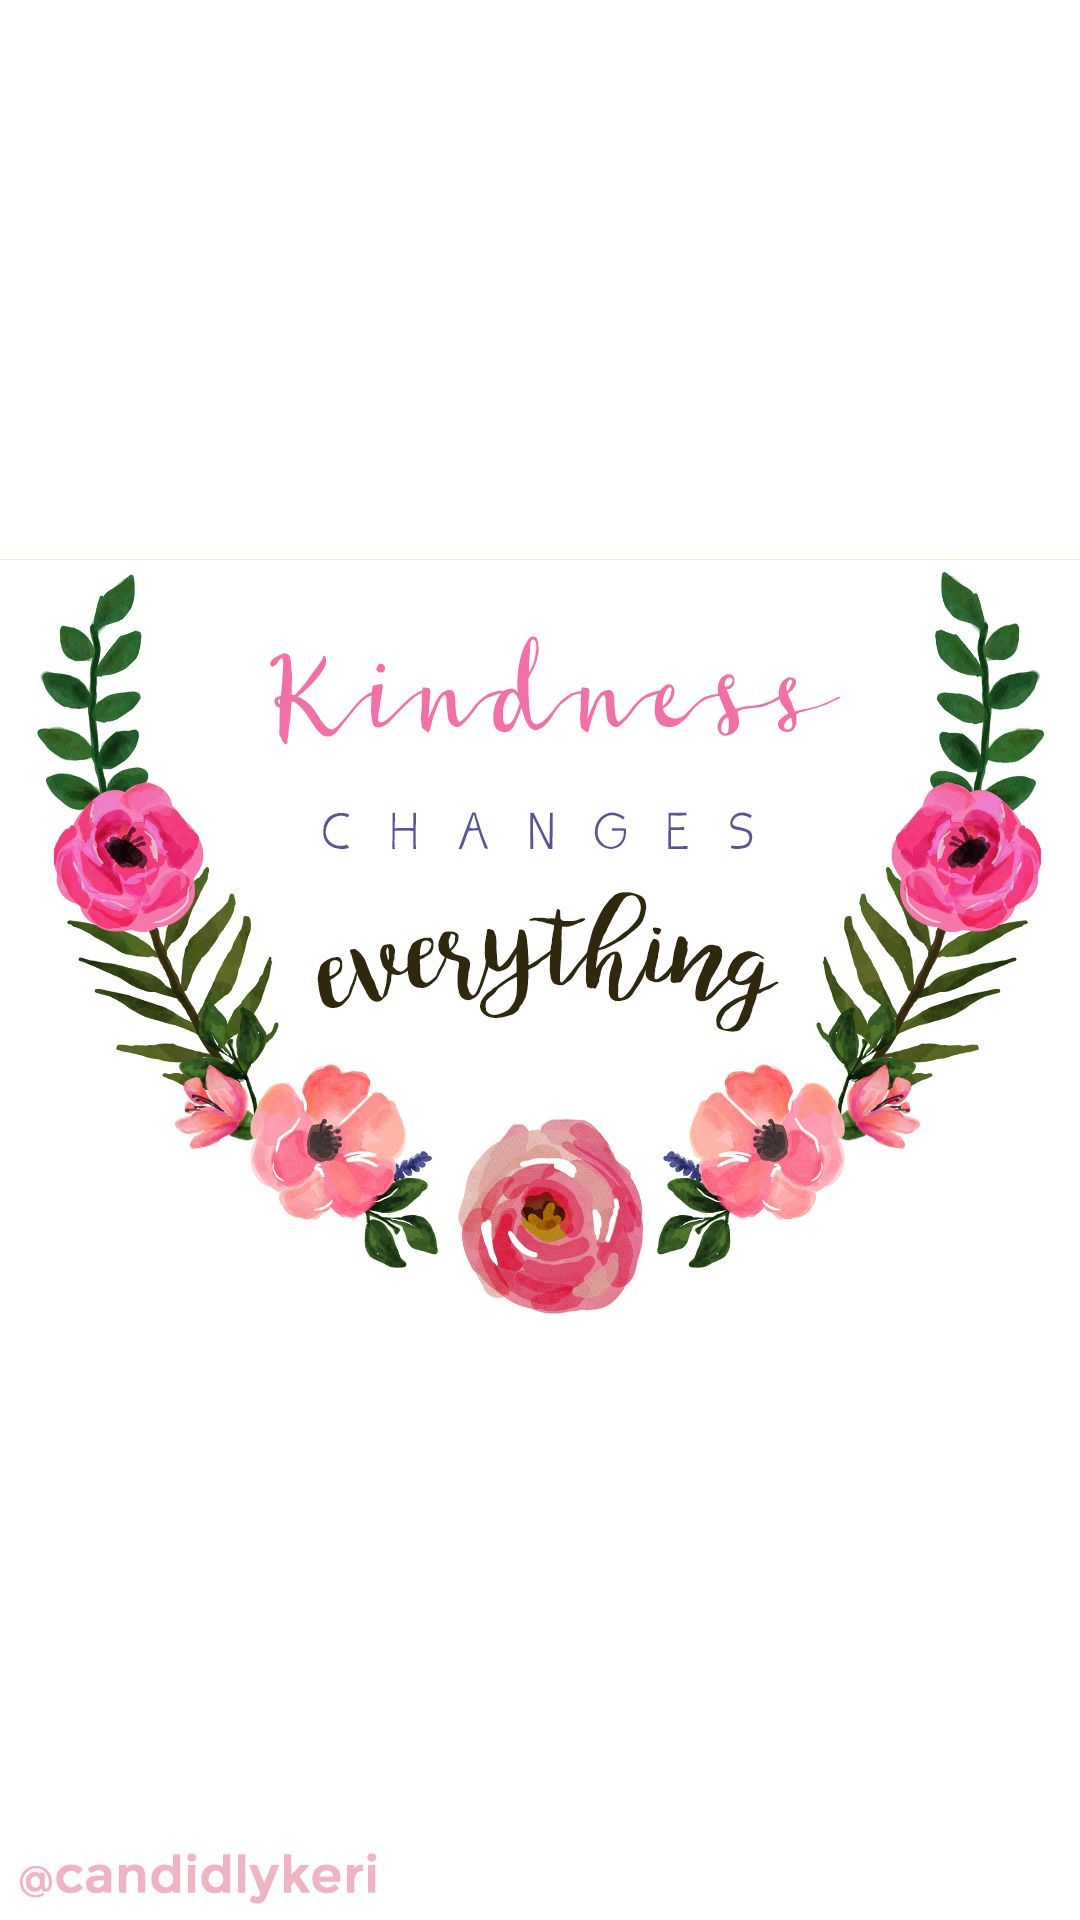 Kindness changes everything quote flower crown inspirational motivational wallpaper you can download. Flower quotes, Flower quotes love, Motivational wallpaper